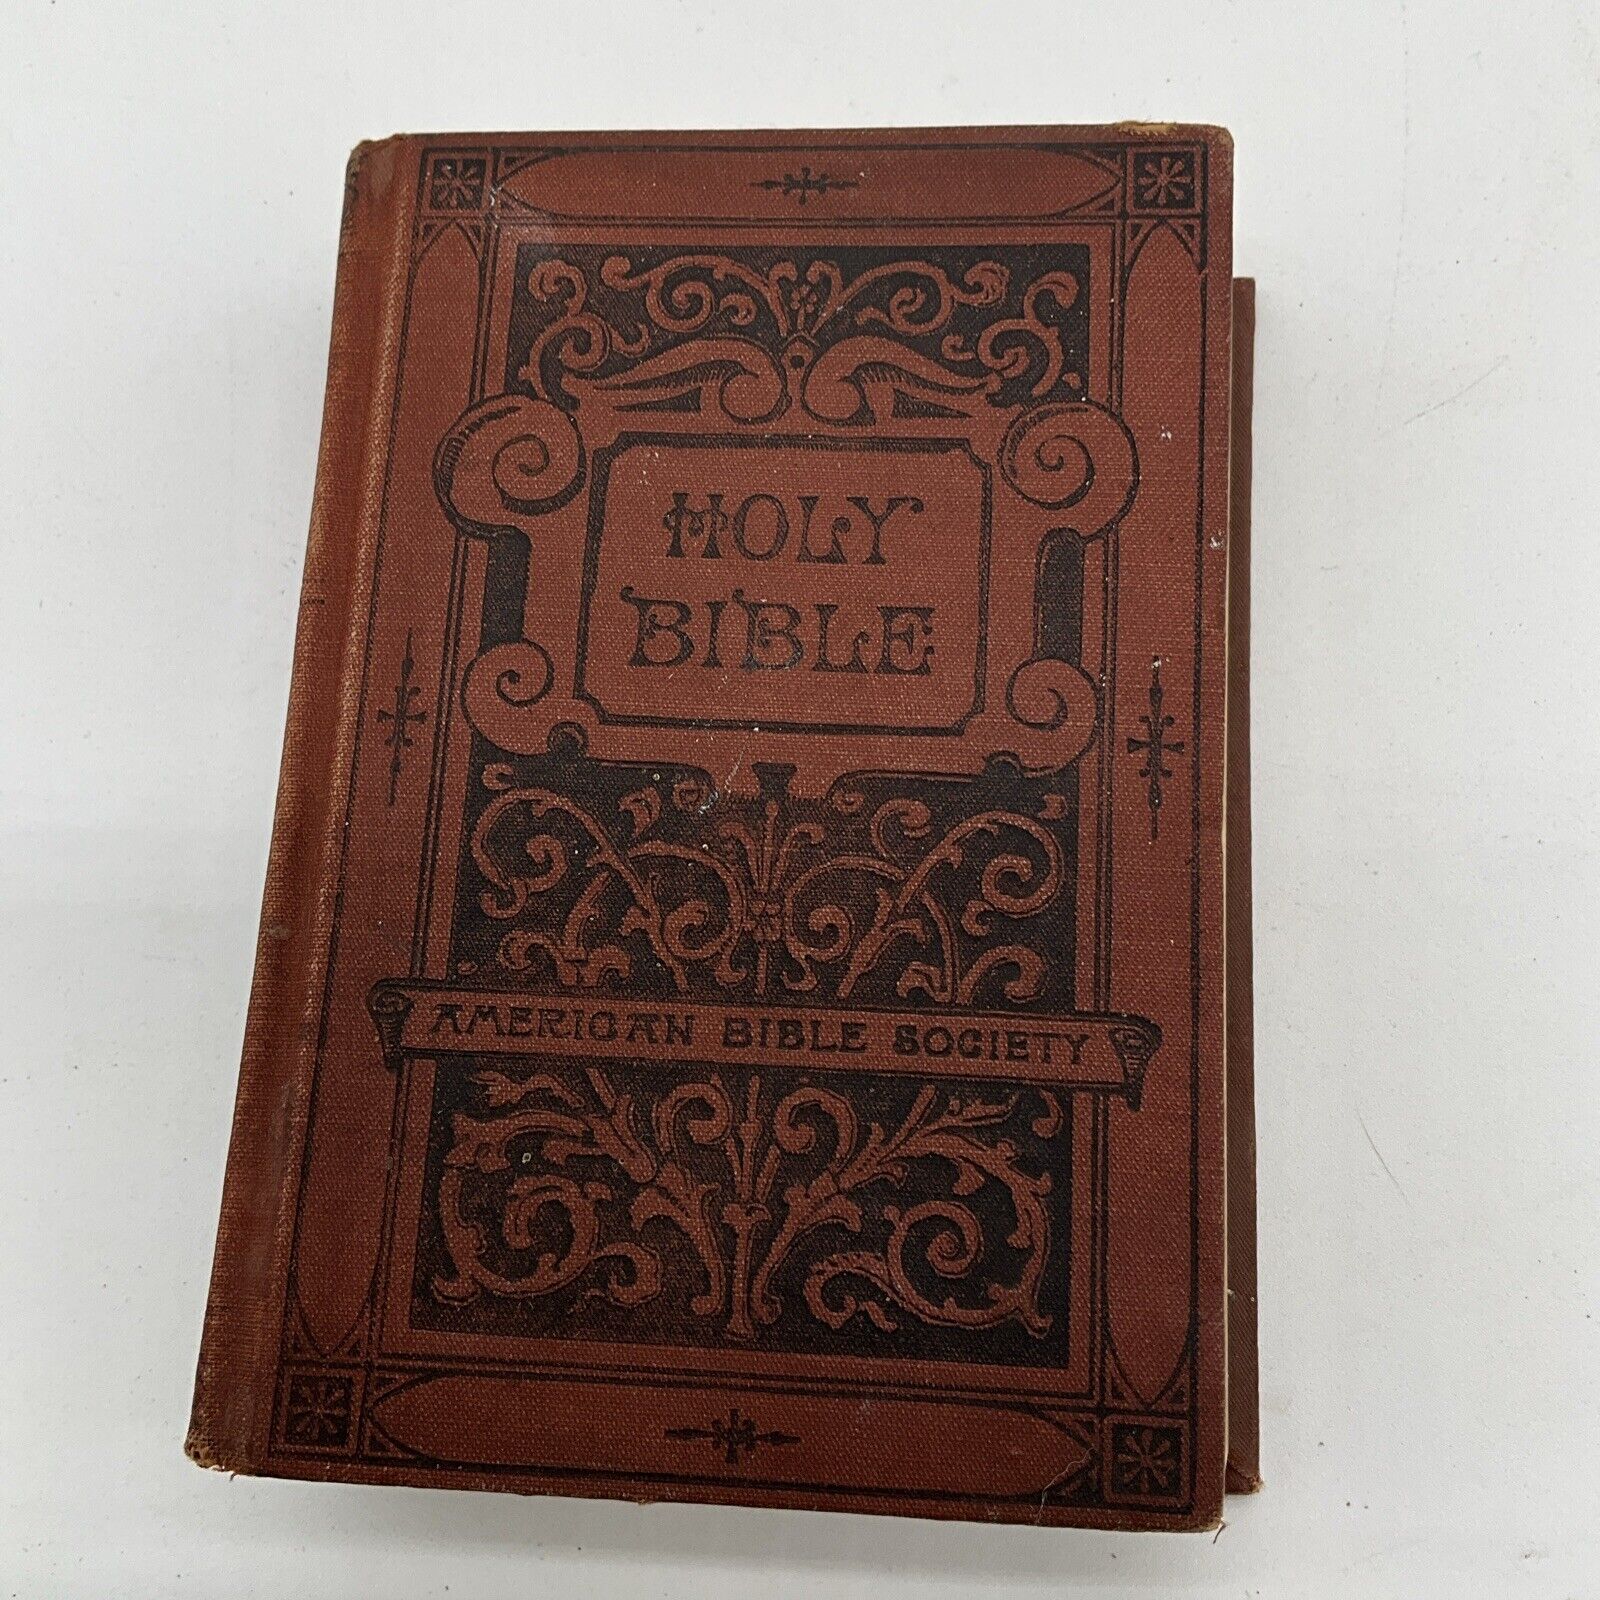 Antique- 1893- HOLY BIBLE-Old & New Testaments- American Bible Society, Small